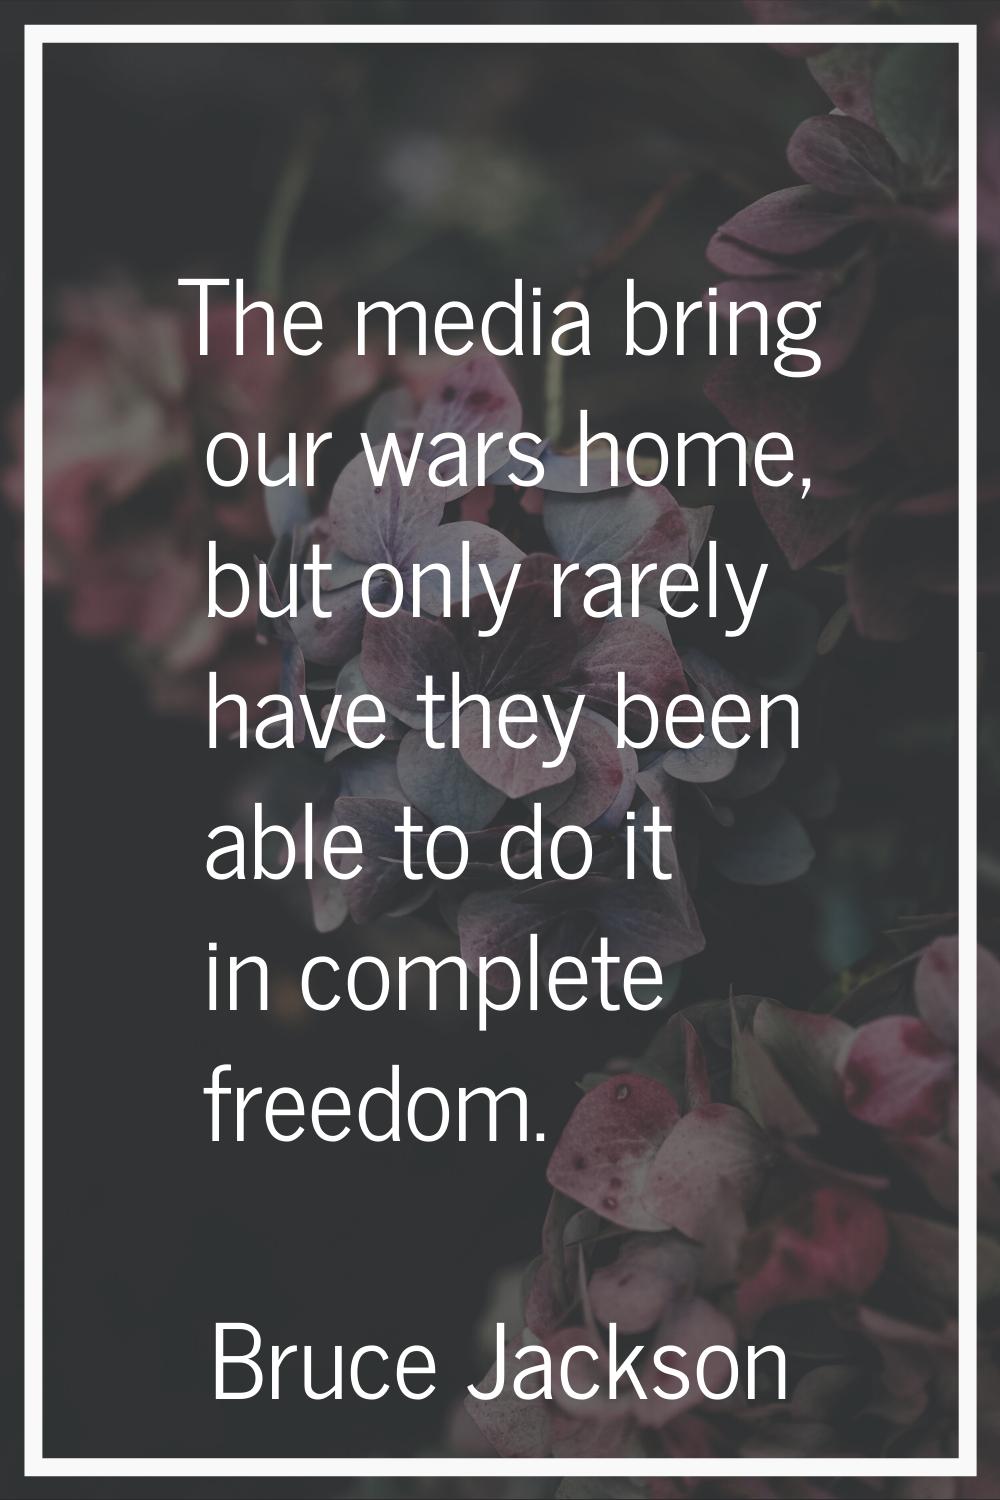 The media bring our wars home, but only rarely have they been able to do it in complete freedom.